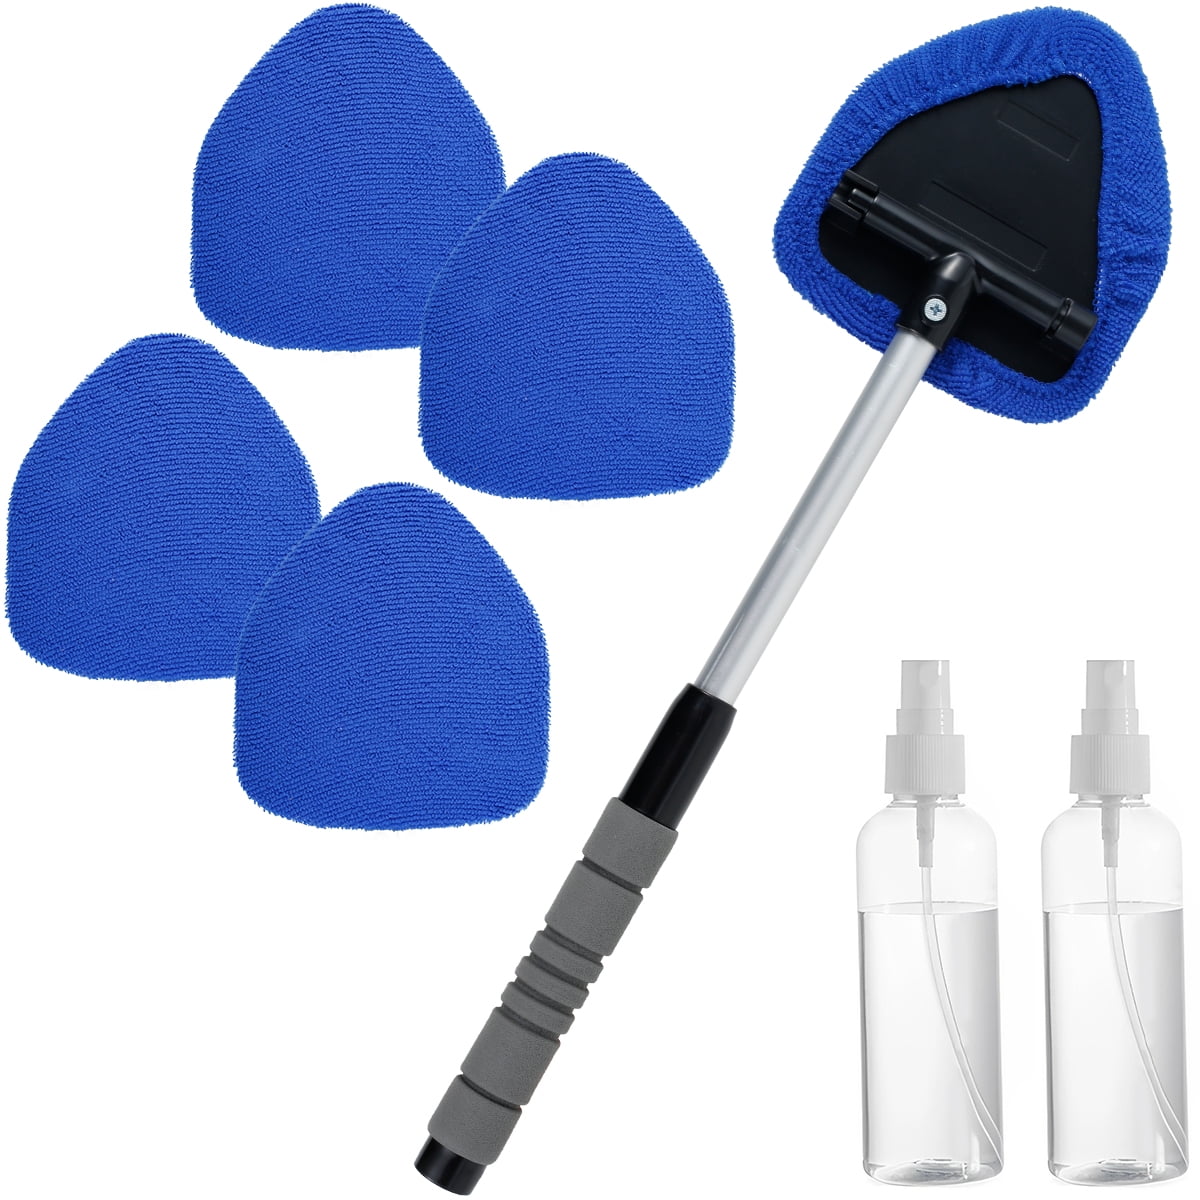 Brand: CleanPro Type: Windshield Cleaner Brush Specs: Dual Layer Microfiber  Towel, Extendable Handle Keywords: Vehicle, Dust Remover, Auto & Home  Window Glass Cleaner Key Points: Easy And Convenient Cleaning, Streak Free  Shine